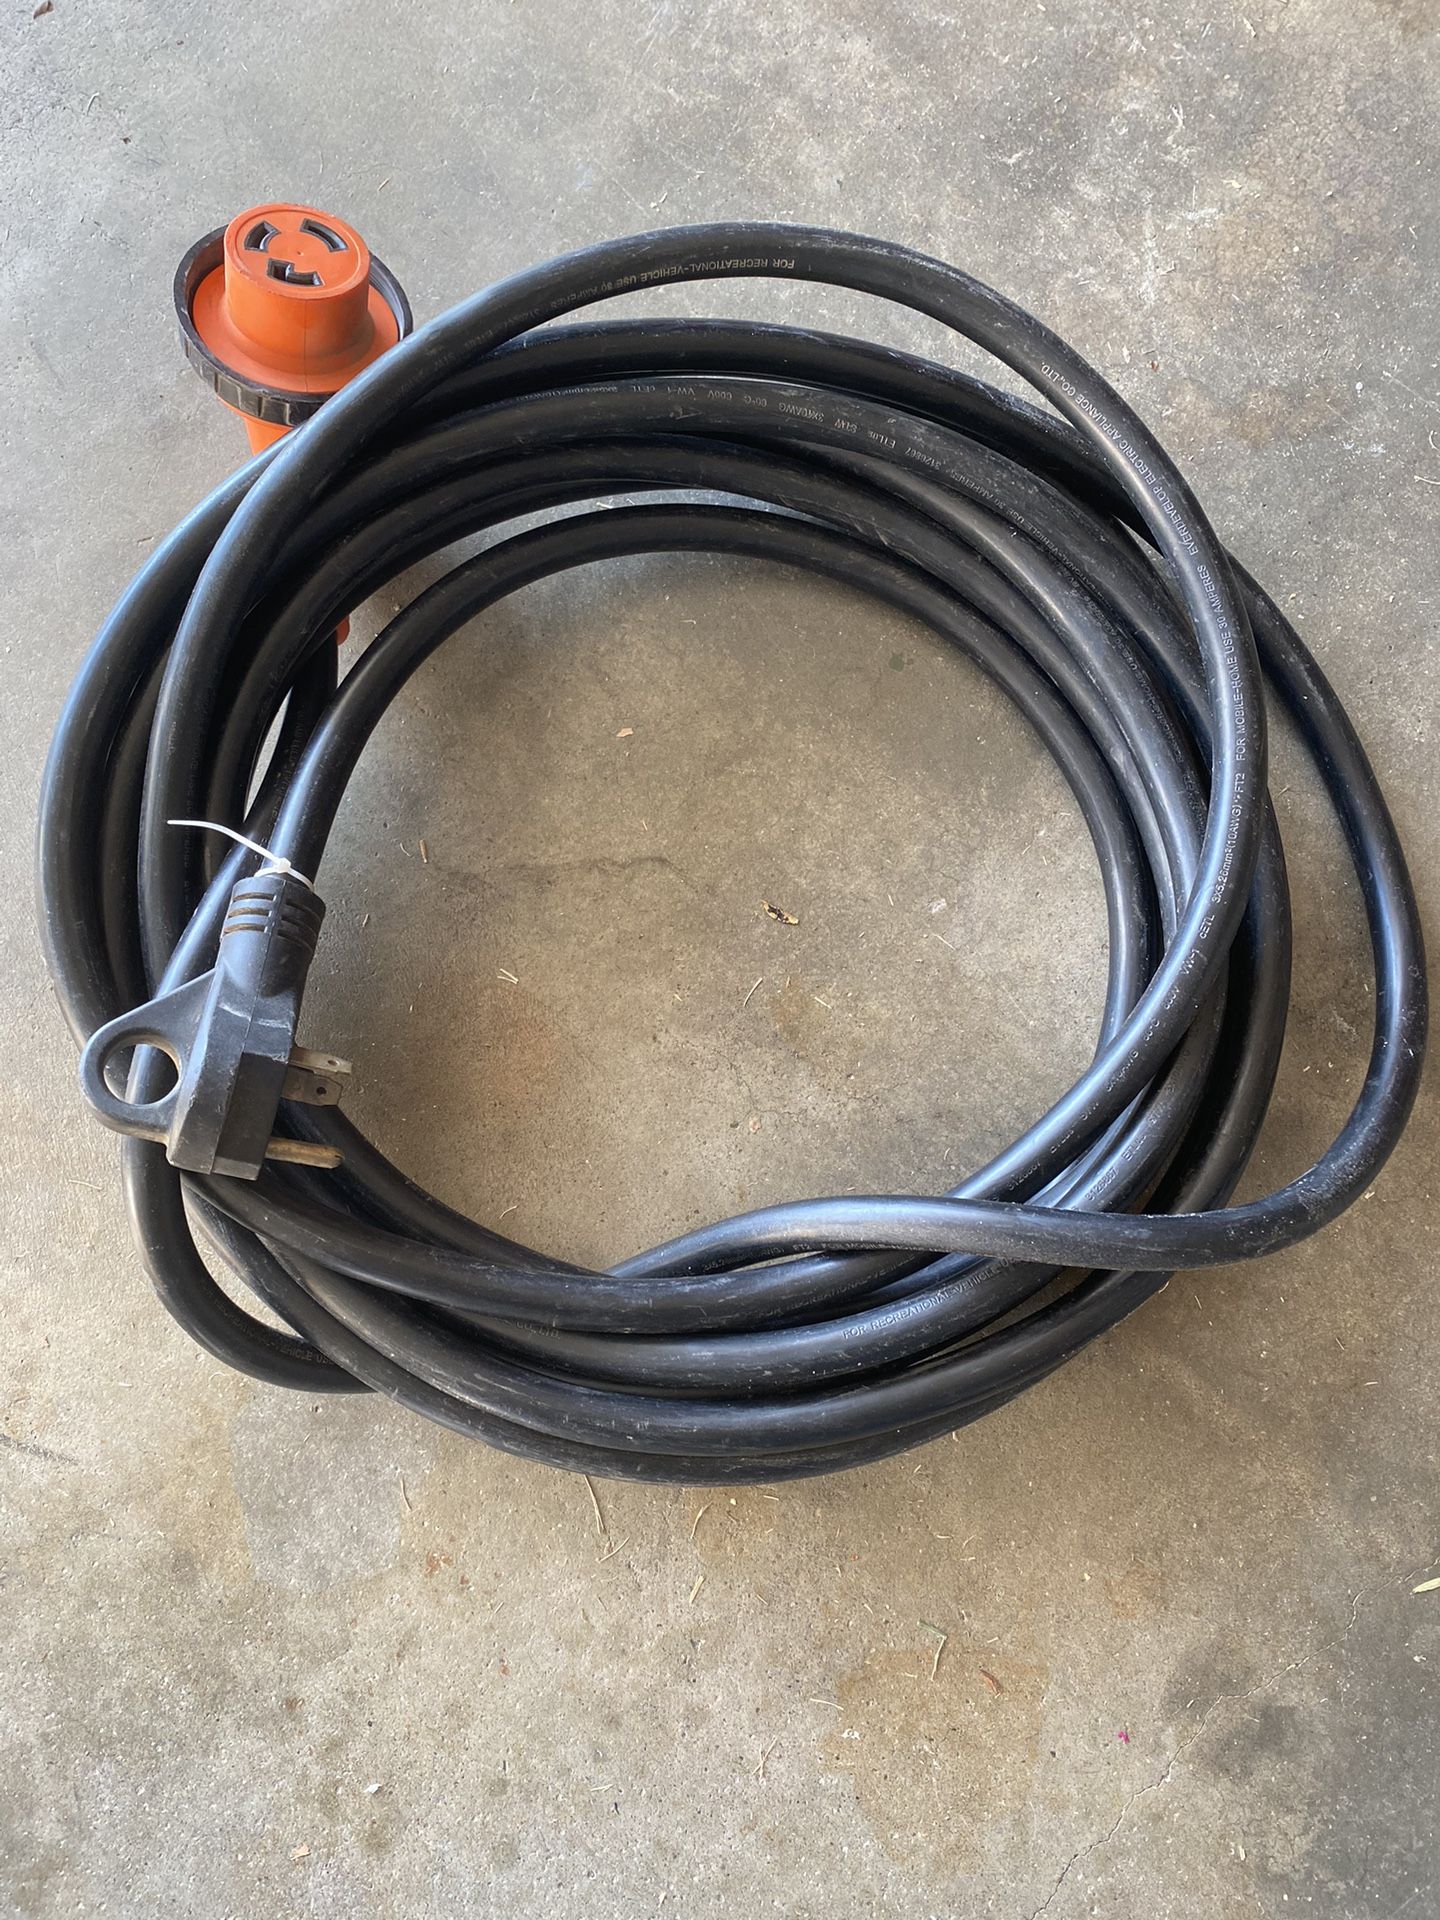 RV Electrical Cord. 